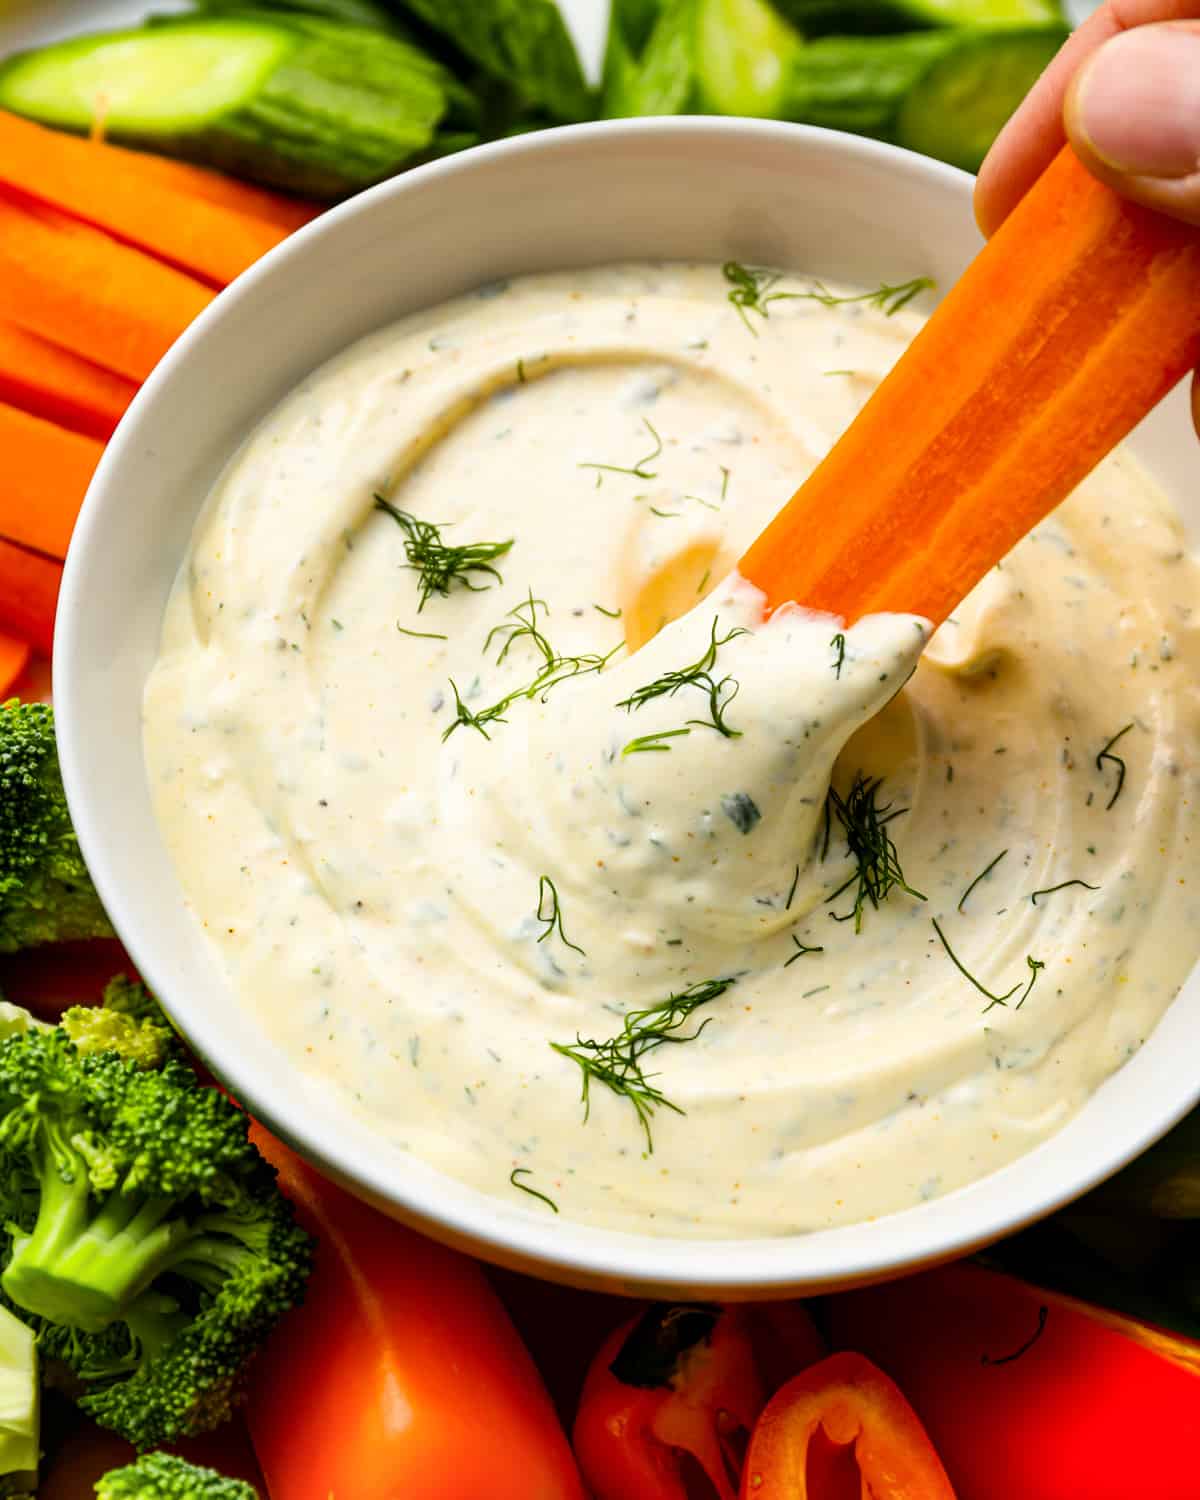 a person is dipping a carrot stick into a bowl of vegetable dip.